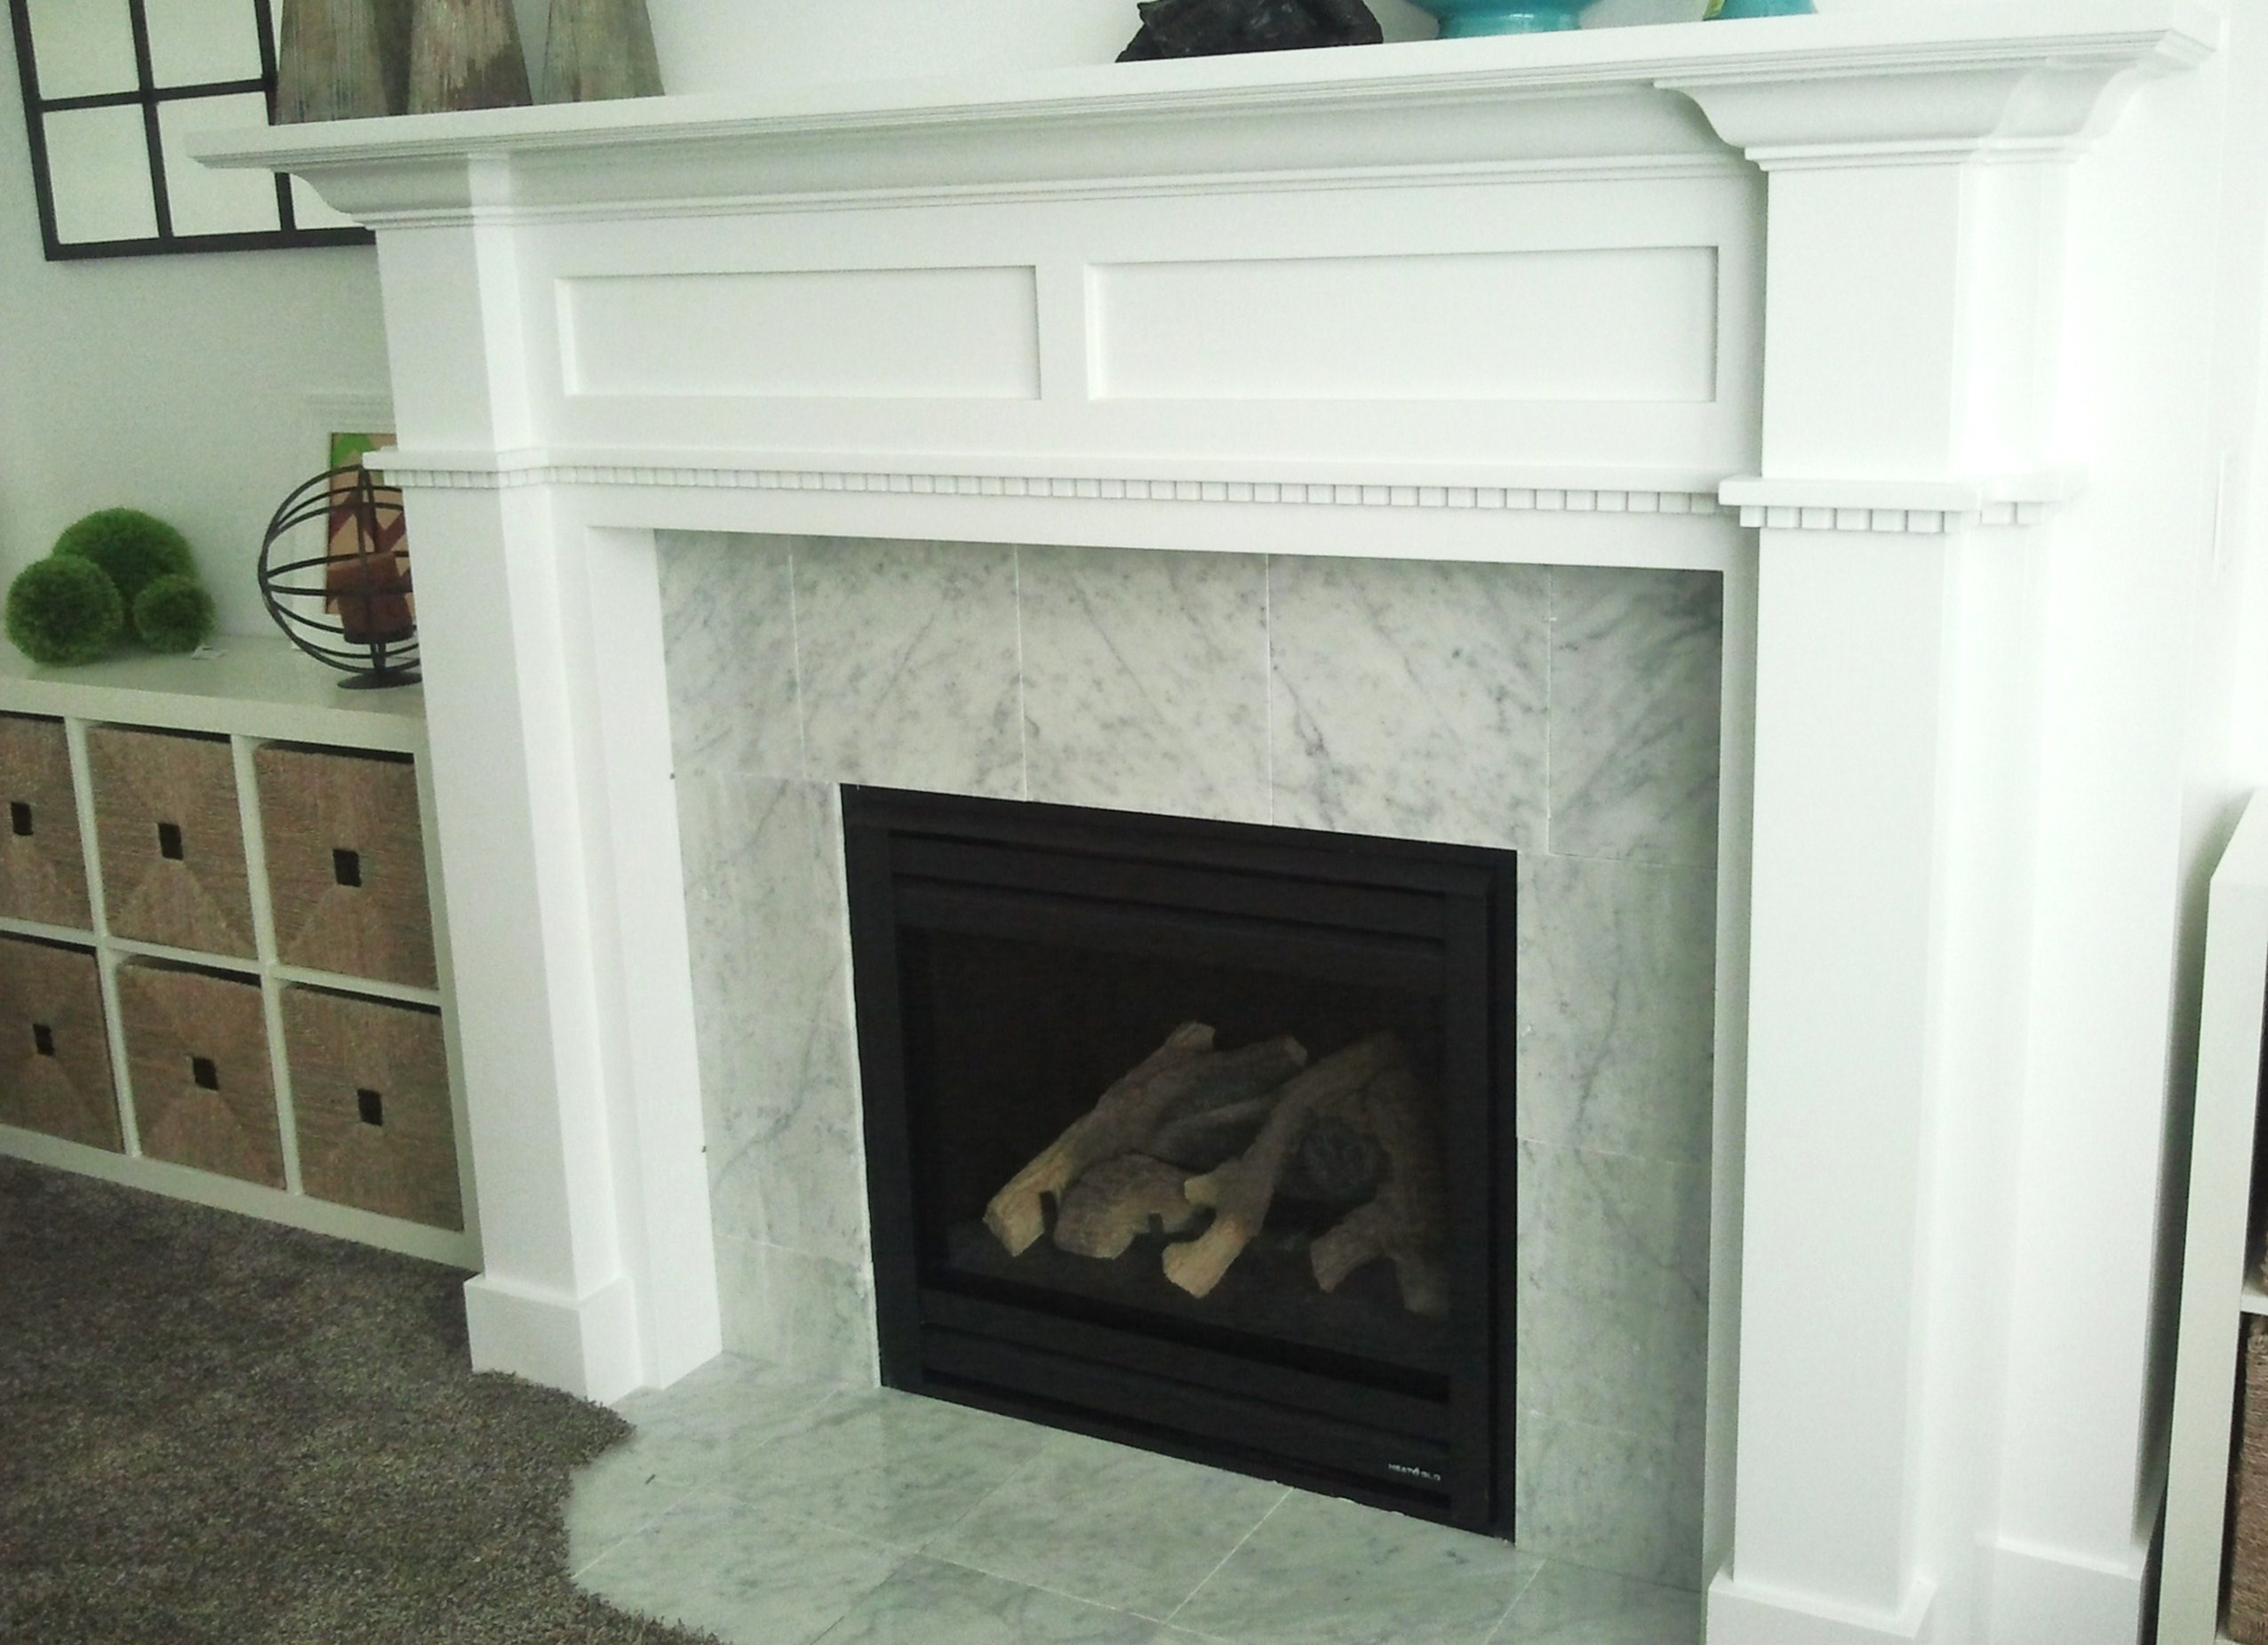 DIY Wood Fireplace Surround
 Give a Makeover to Your Fireplace with a DIY Fireplace